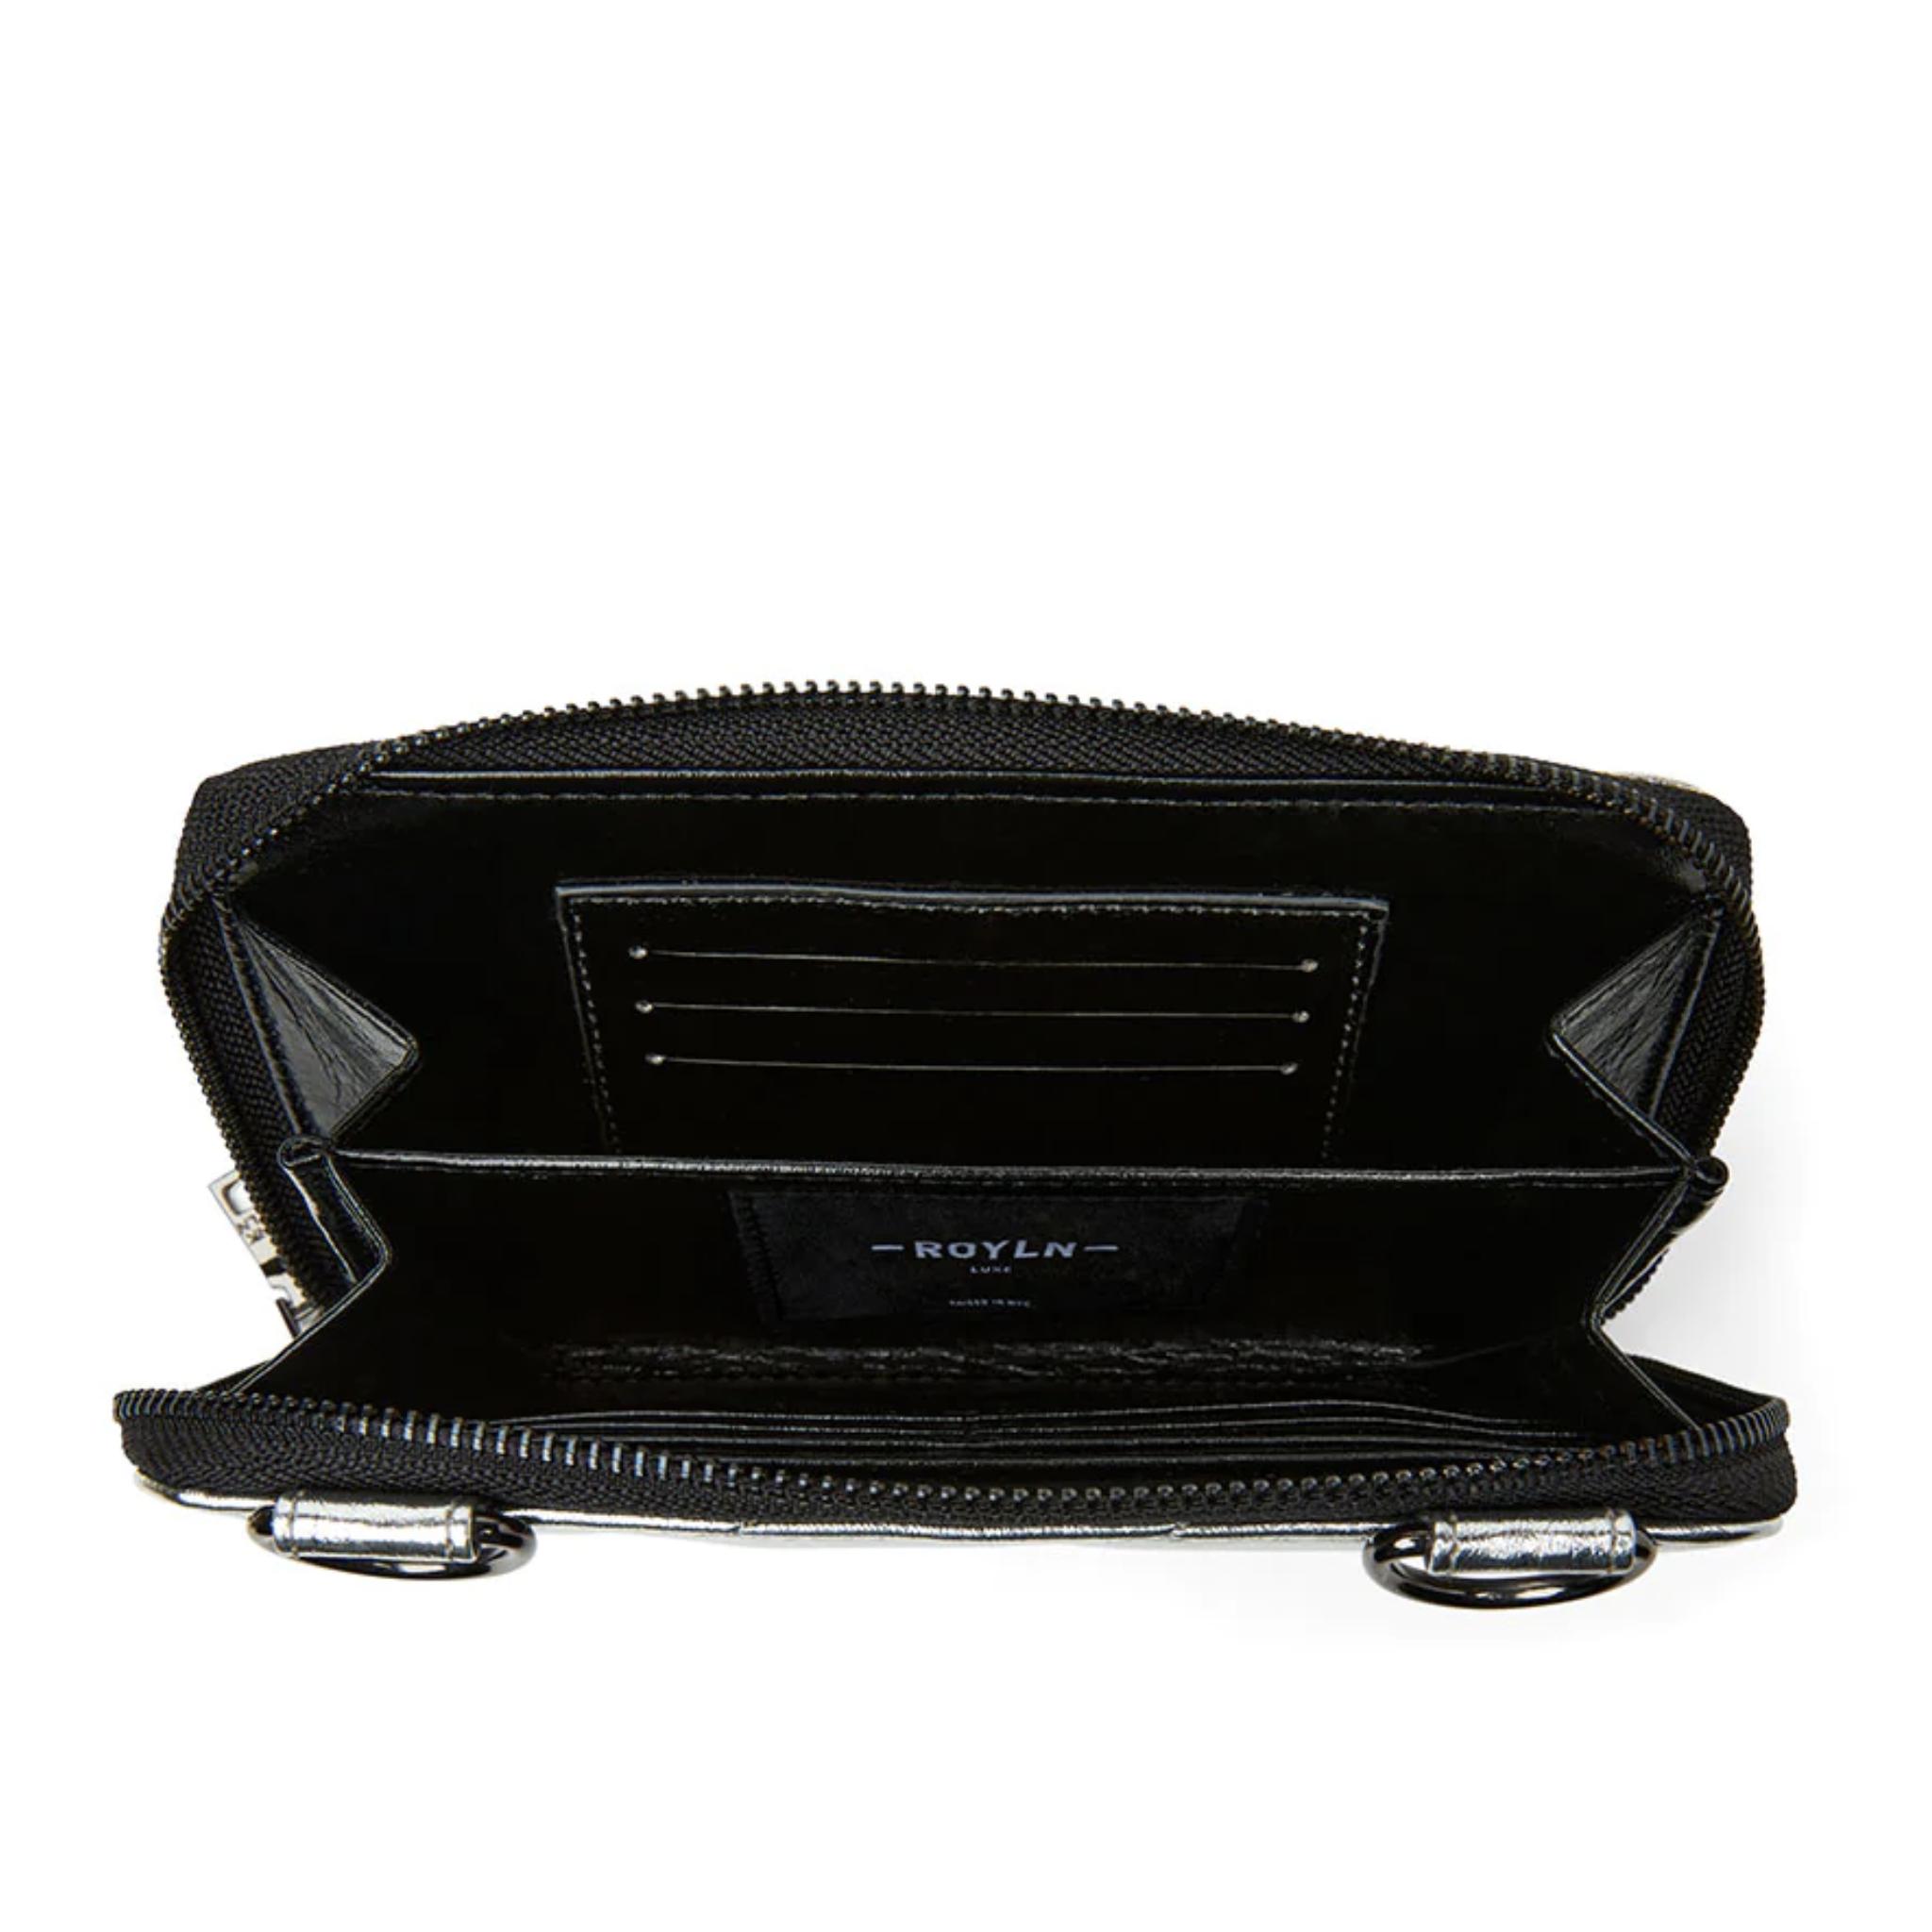 THE STARLET WALLET